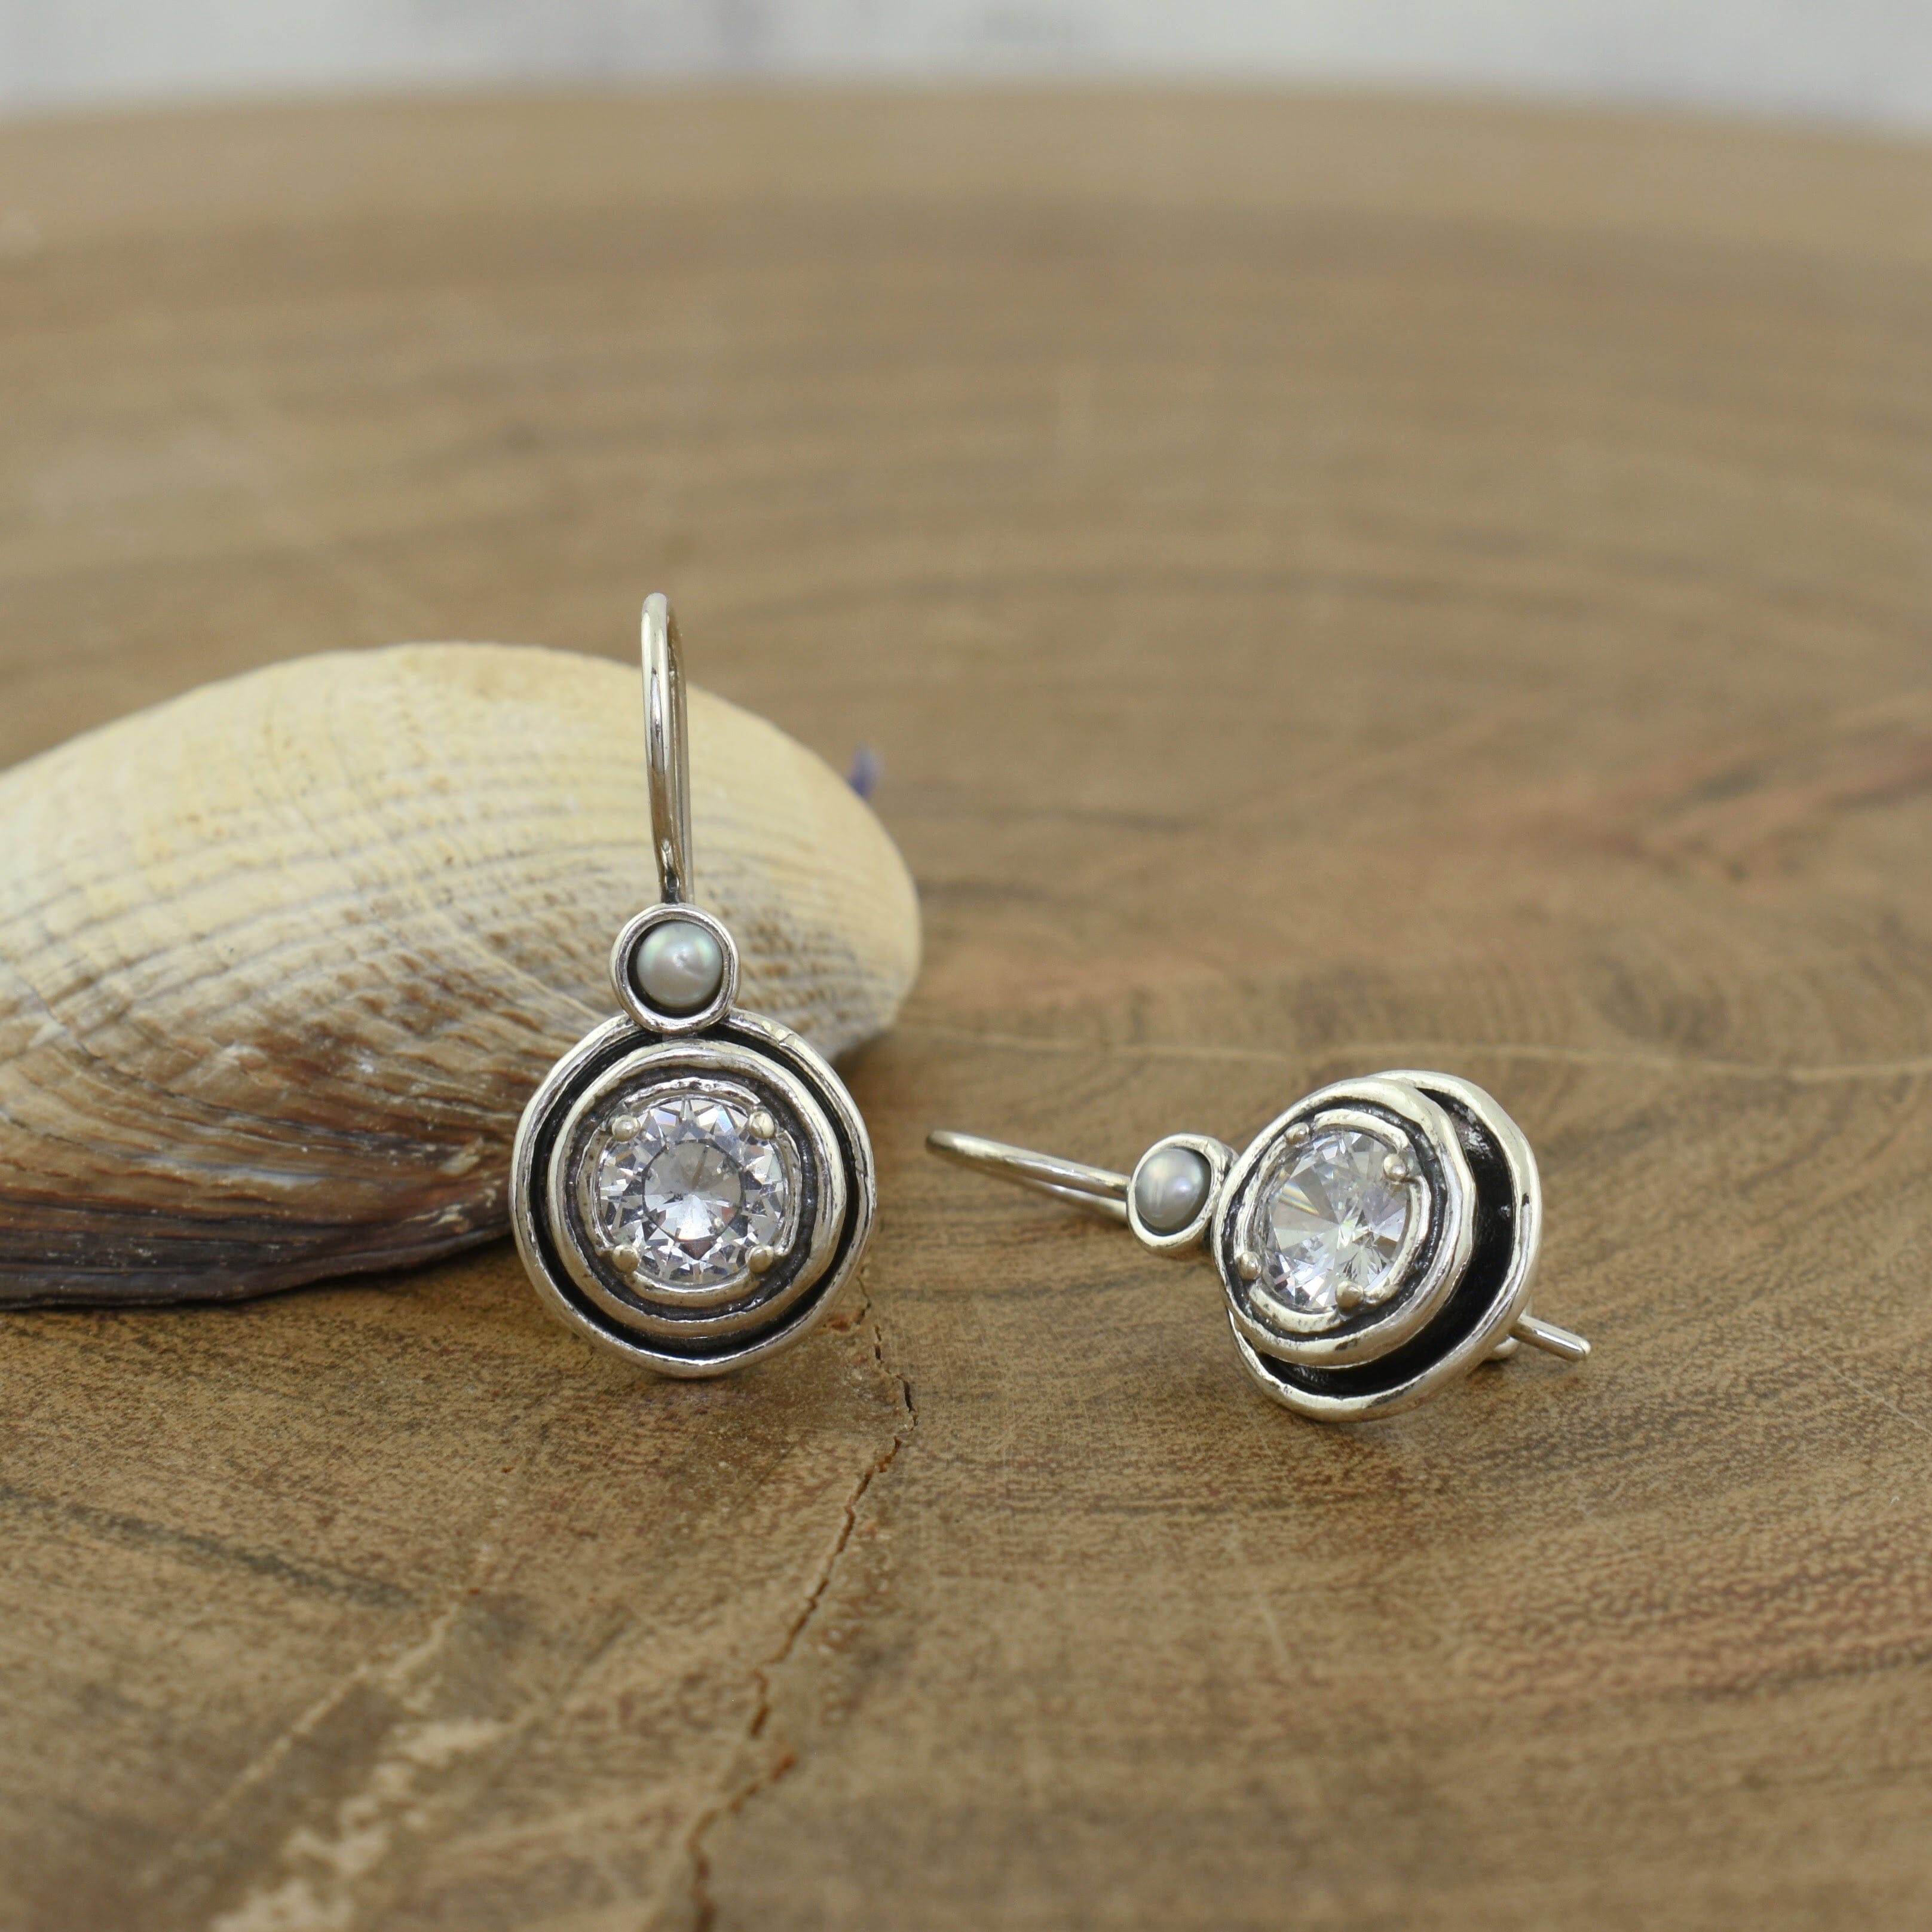 Sterling silver earrings featuring CZ and freshwater pearl